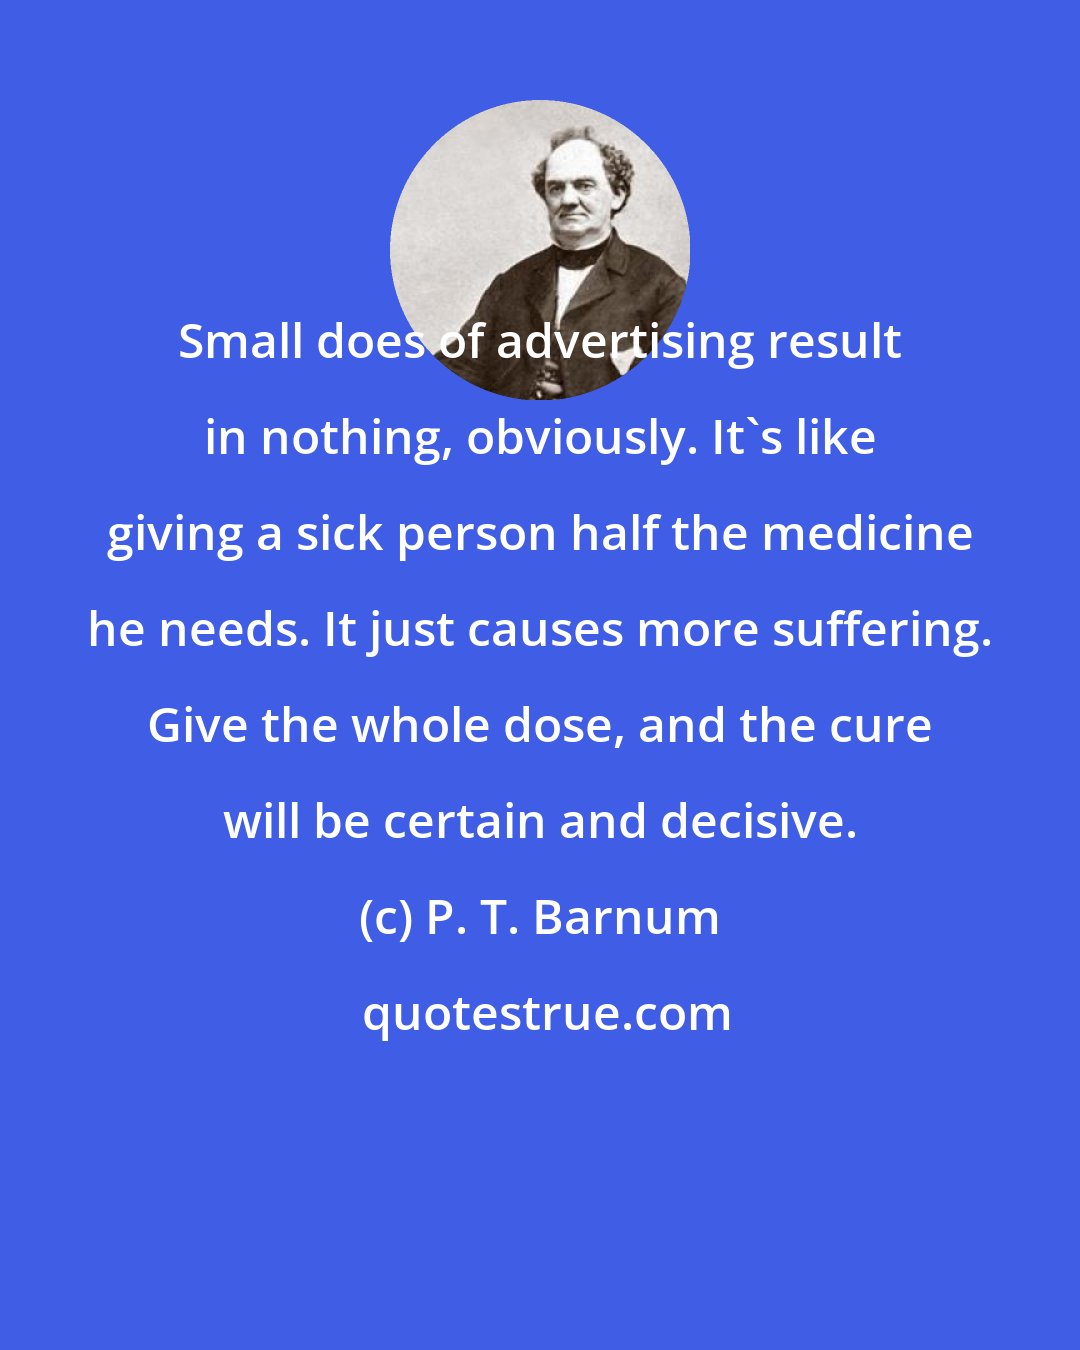 P. T. Barnum: Small does of advertising result in nothing, obviously. It's like giving a sick person half the medicine he needs. It just causes more suffering. Give the whole dose, and the cure will be certain and decisive.